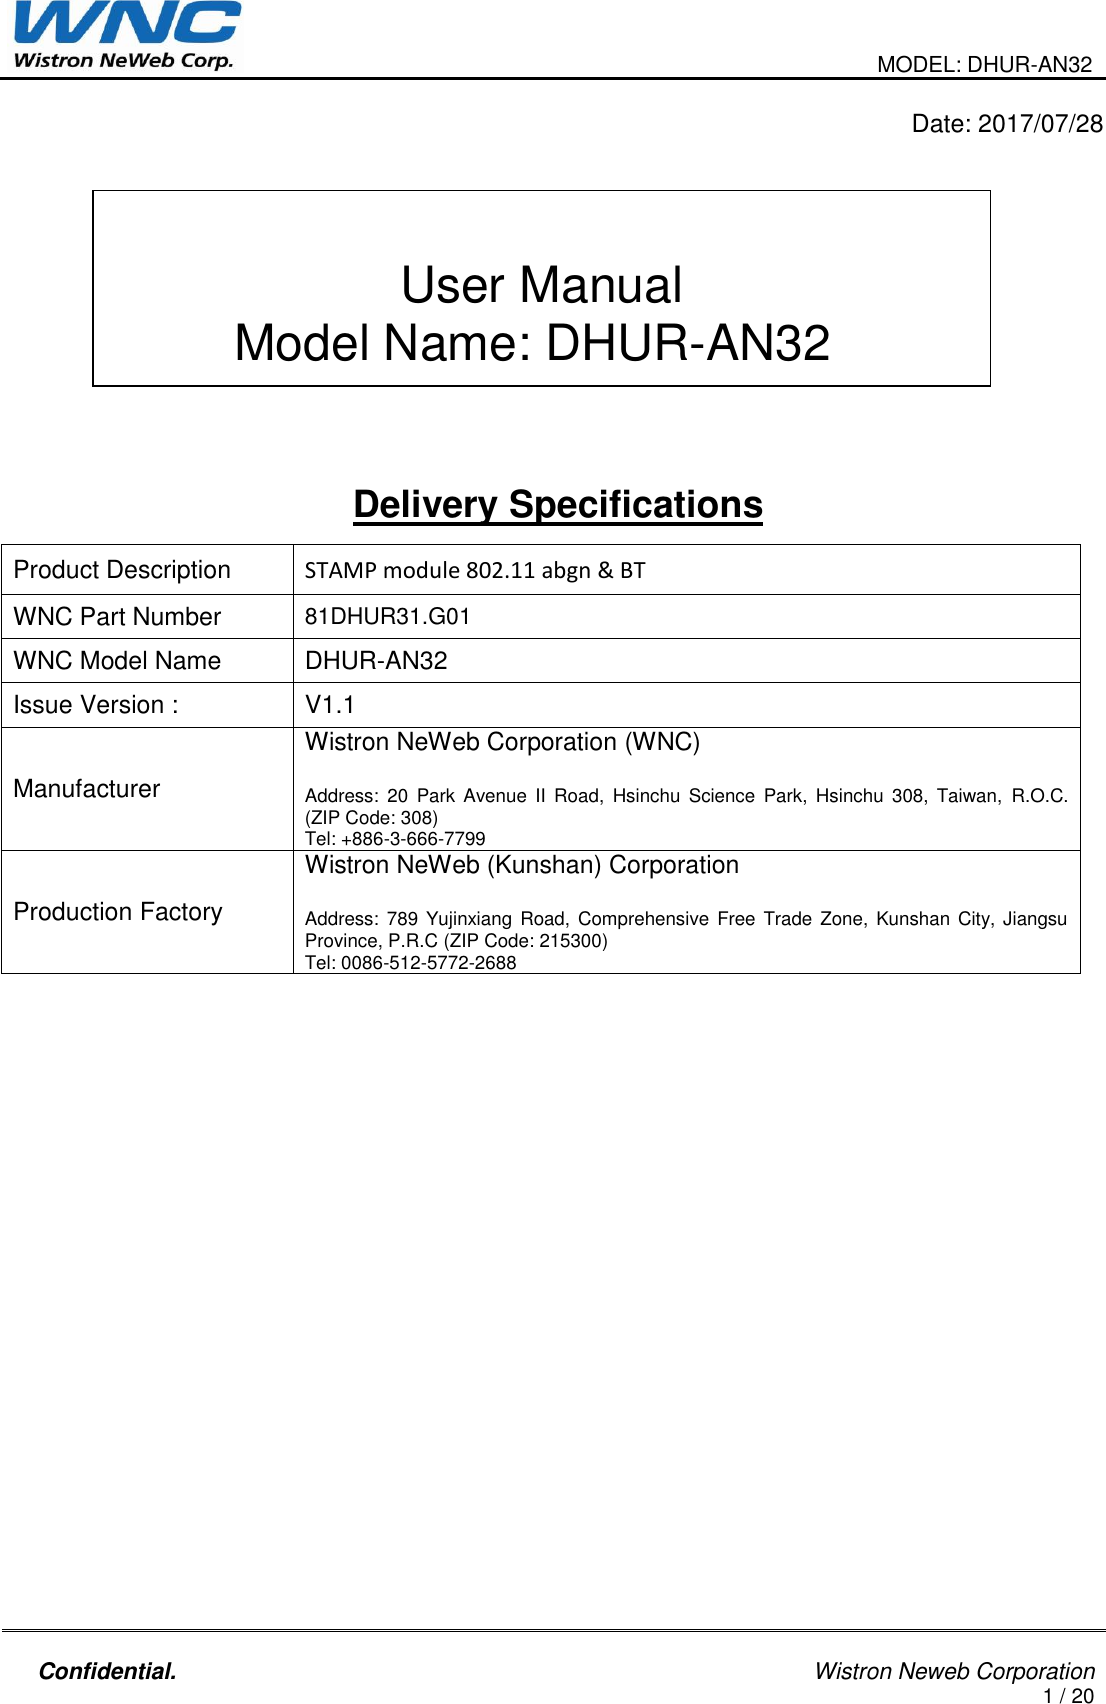                                                                                               MODEL: DHUR-AN32    Confidential.                                                                                                    Wistron Neweb Corporation 1 / 20                                                                                                     Date: 2017/07/28         Delivery Specifications    Product Description STAMP module 802.11 abgn &amp; BT WNC Part Number 81DHUR31.G01  WNC Model Name DHUR-AN32 Issue Version :  V1.1 Manufacturer Wistron NeWeb Corporation (WNC)  Address:  20  Park  Avenue  II  Road,  Hsinchu  Science  Park, Hsinchu  308,  Taiwan,  R.O.C. (ZIP Code: 308) Tel: +886-3-666-7799 Production Factory Wistron NeWeb (Kunshan) Corporation  Address: 789 Yujinxiang Road, Comprehensive Free Trade Zone,  Kunshan City, Jiangsu Province, P.R.C (ZIP Code: 215300) Tel: 0086-512-5772-2688  User Manual Model Name: DHUR-AN32 